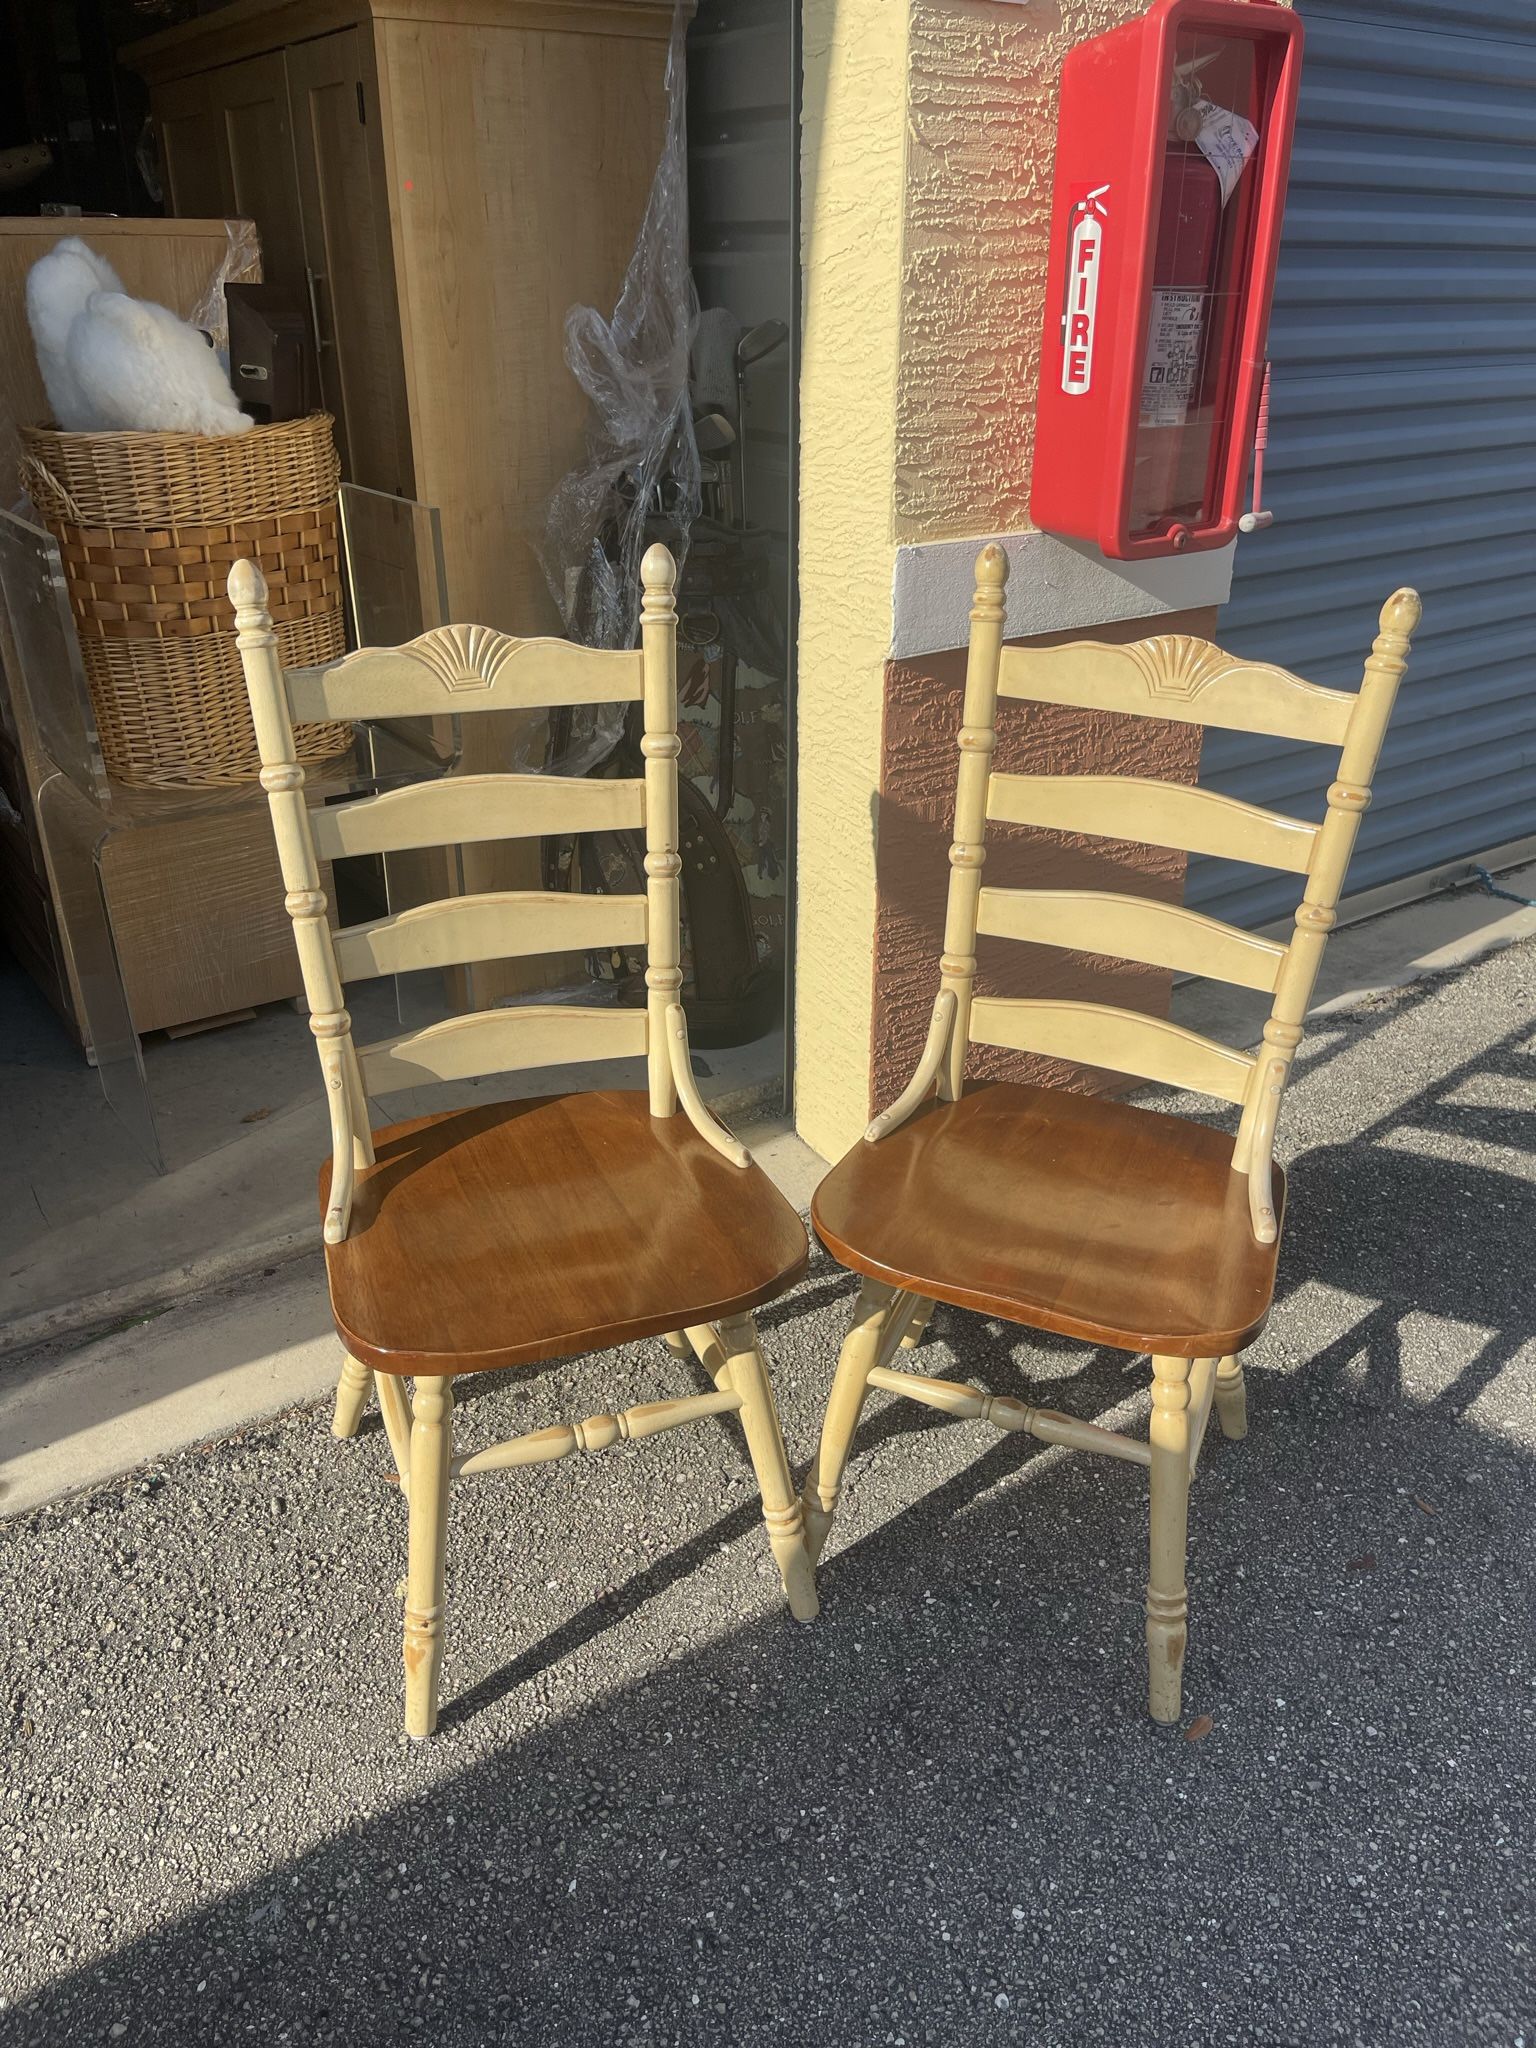 2 Dining Room Chairs $20